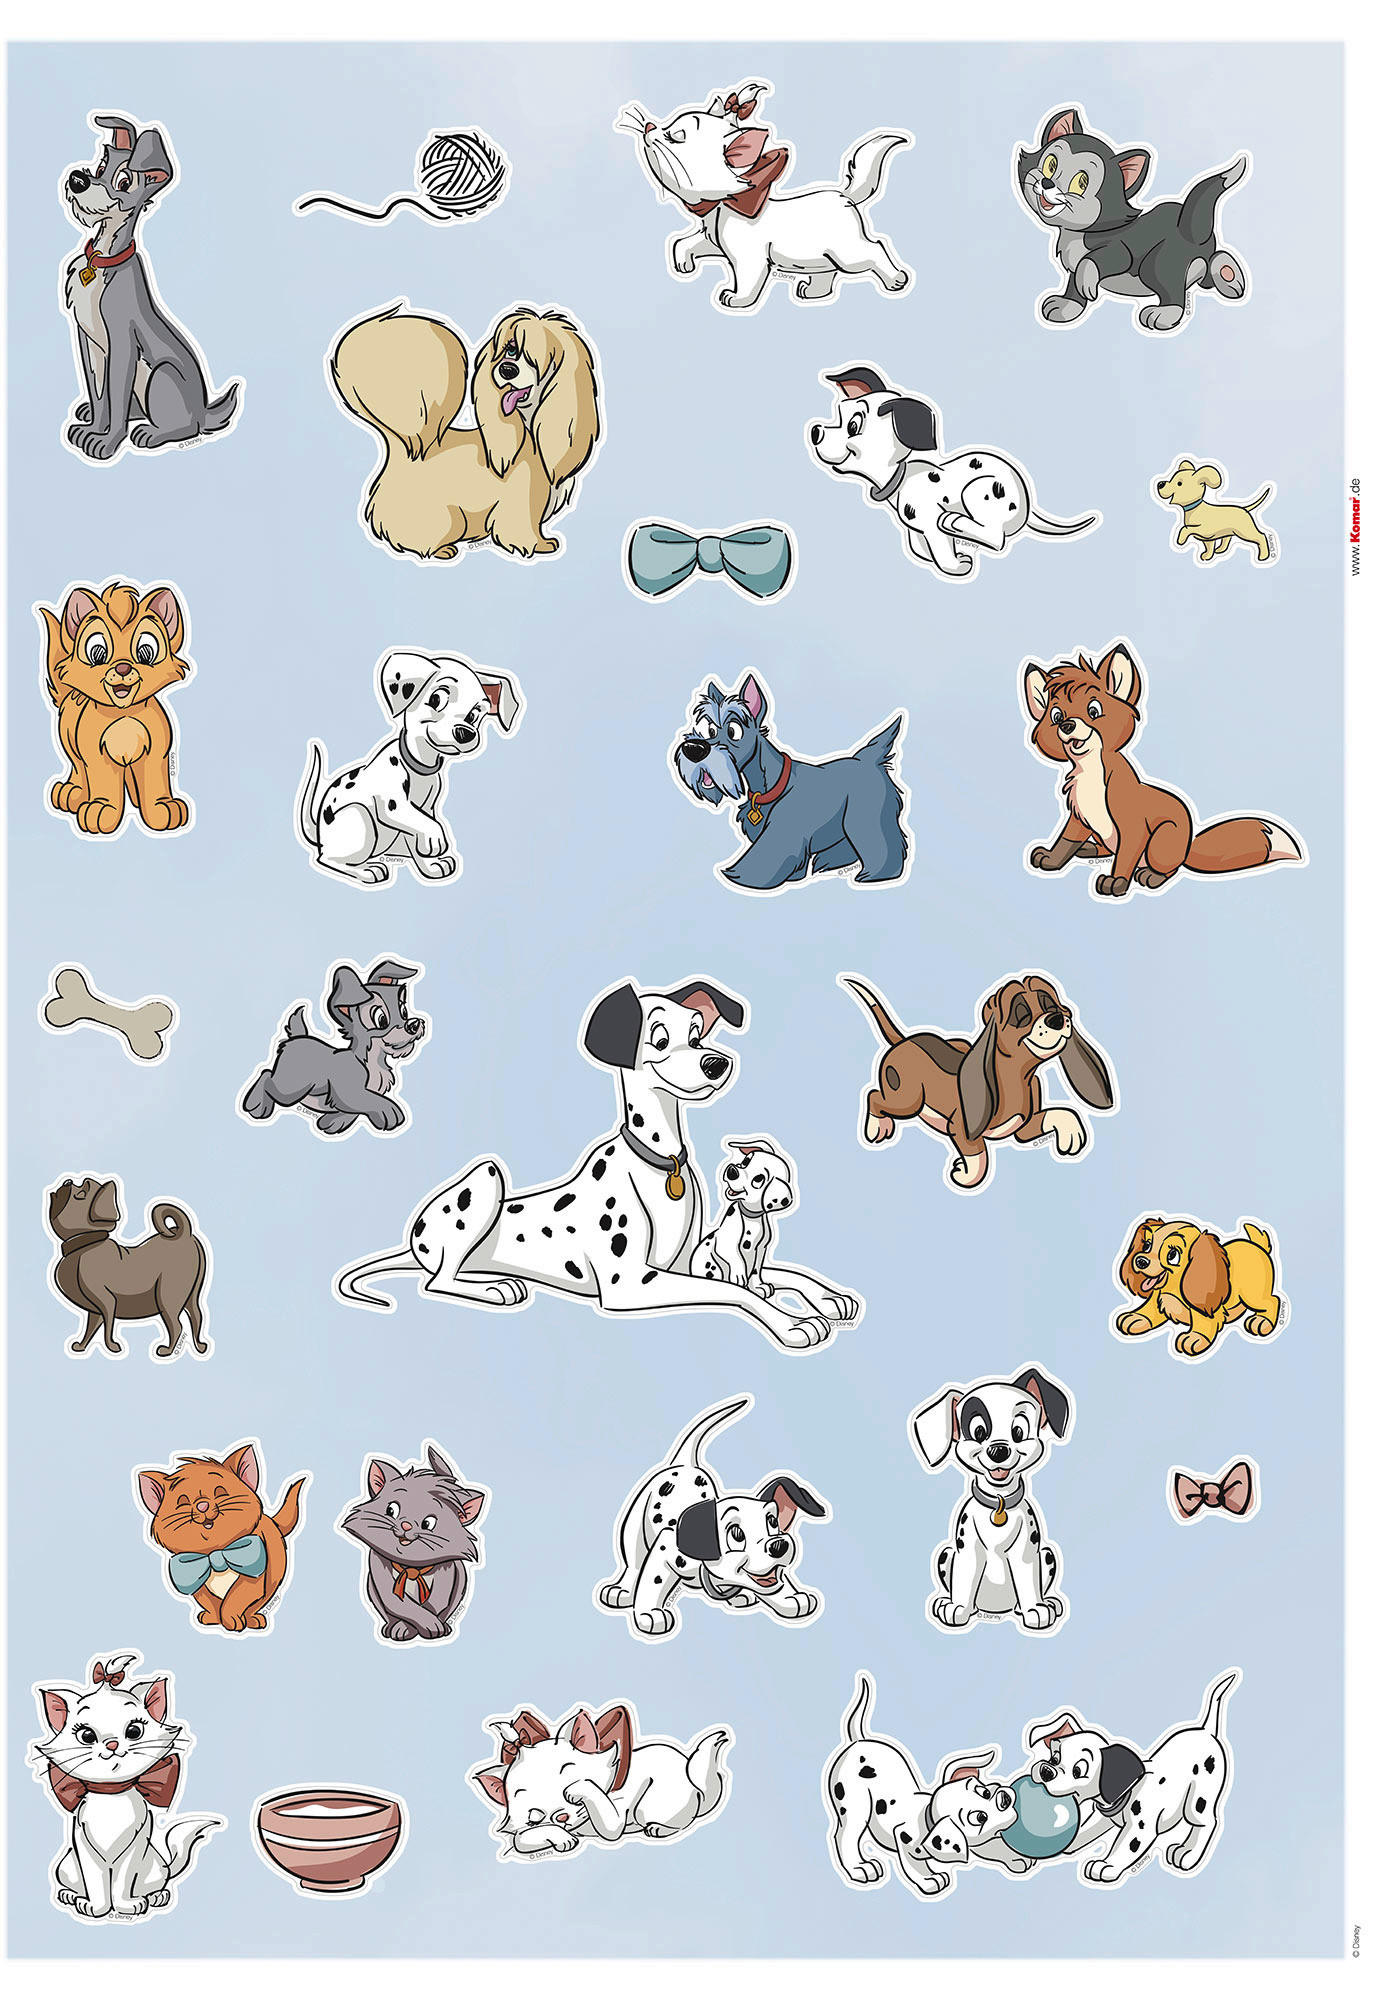 bei Dalmatiner 101 ▷ Komar Dogs and Cats Disney Cats kaufen online Wandtattoo and Dogs Disney POCO